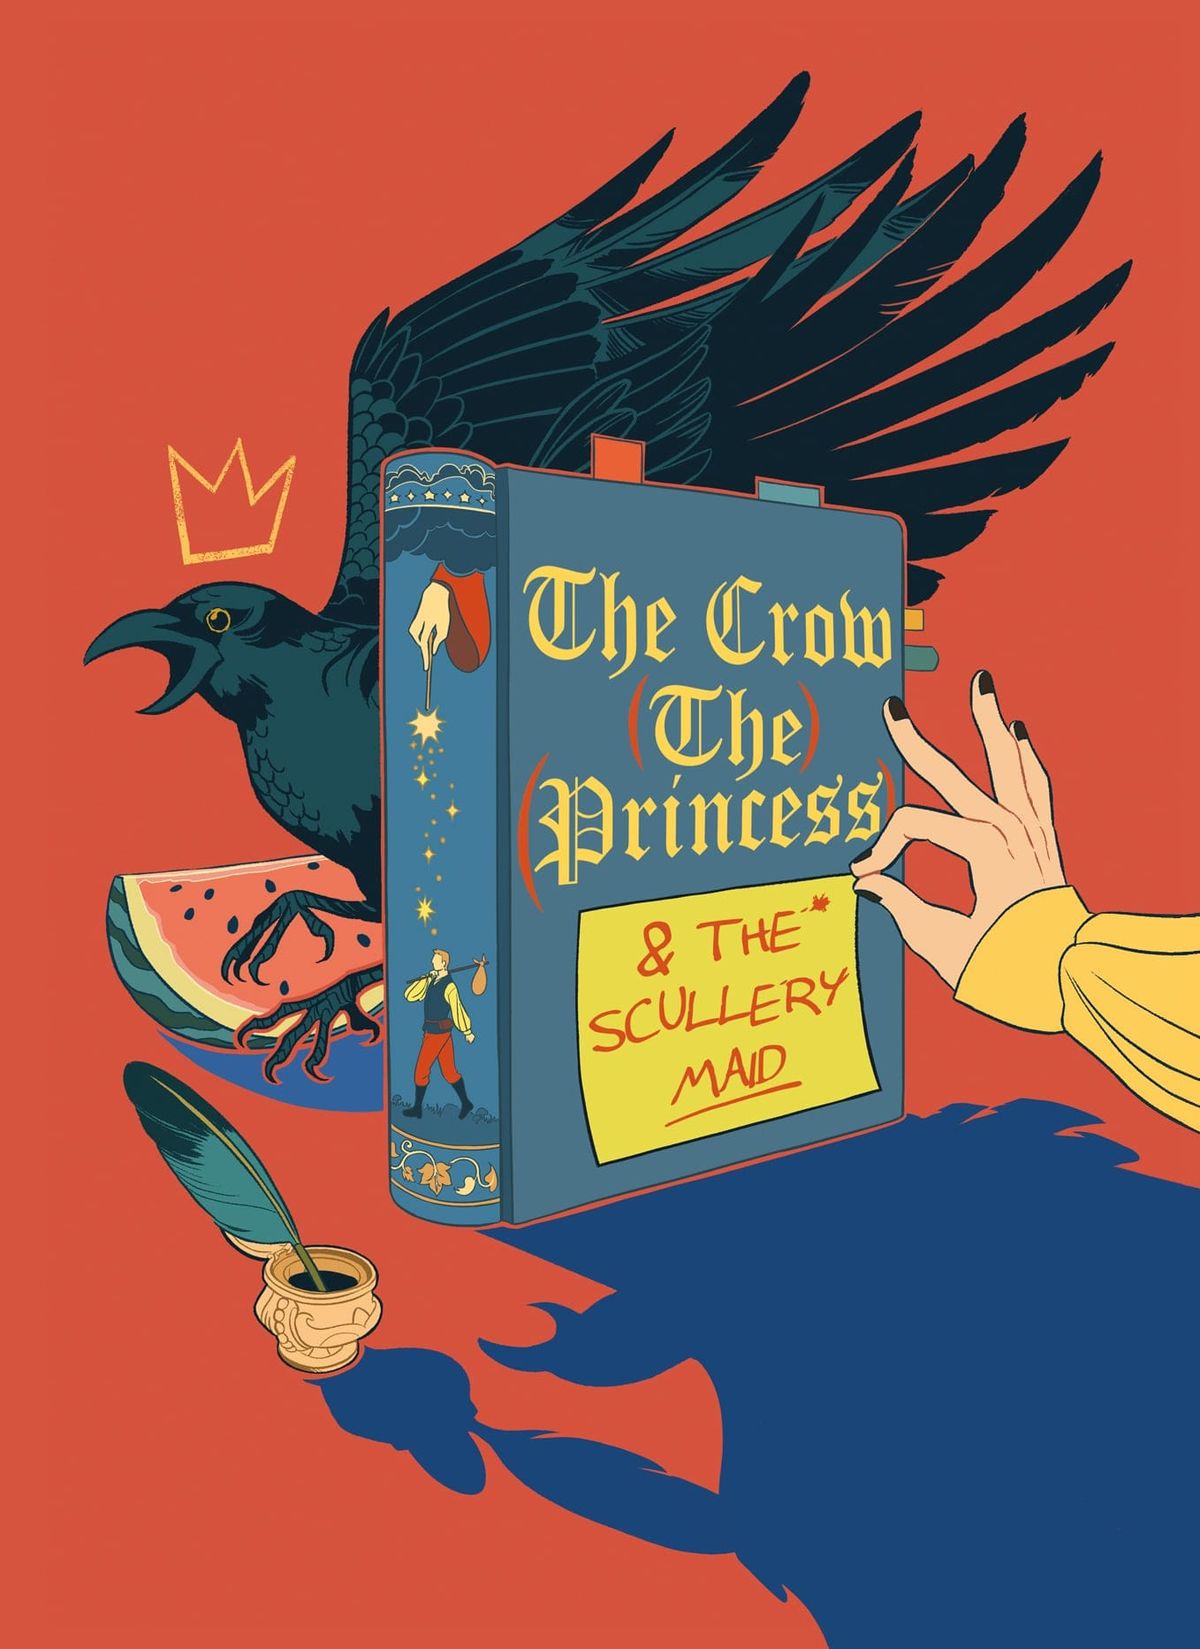 The Crow (the Princess) & the Scullery Maid